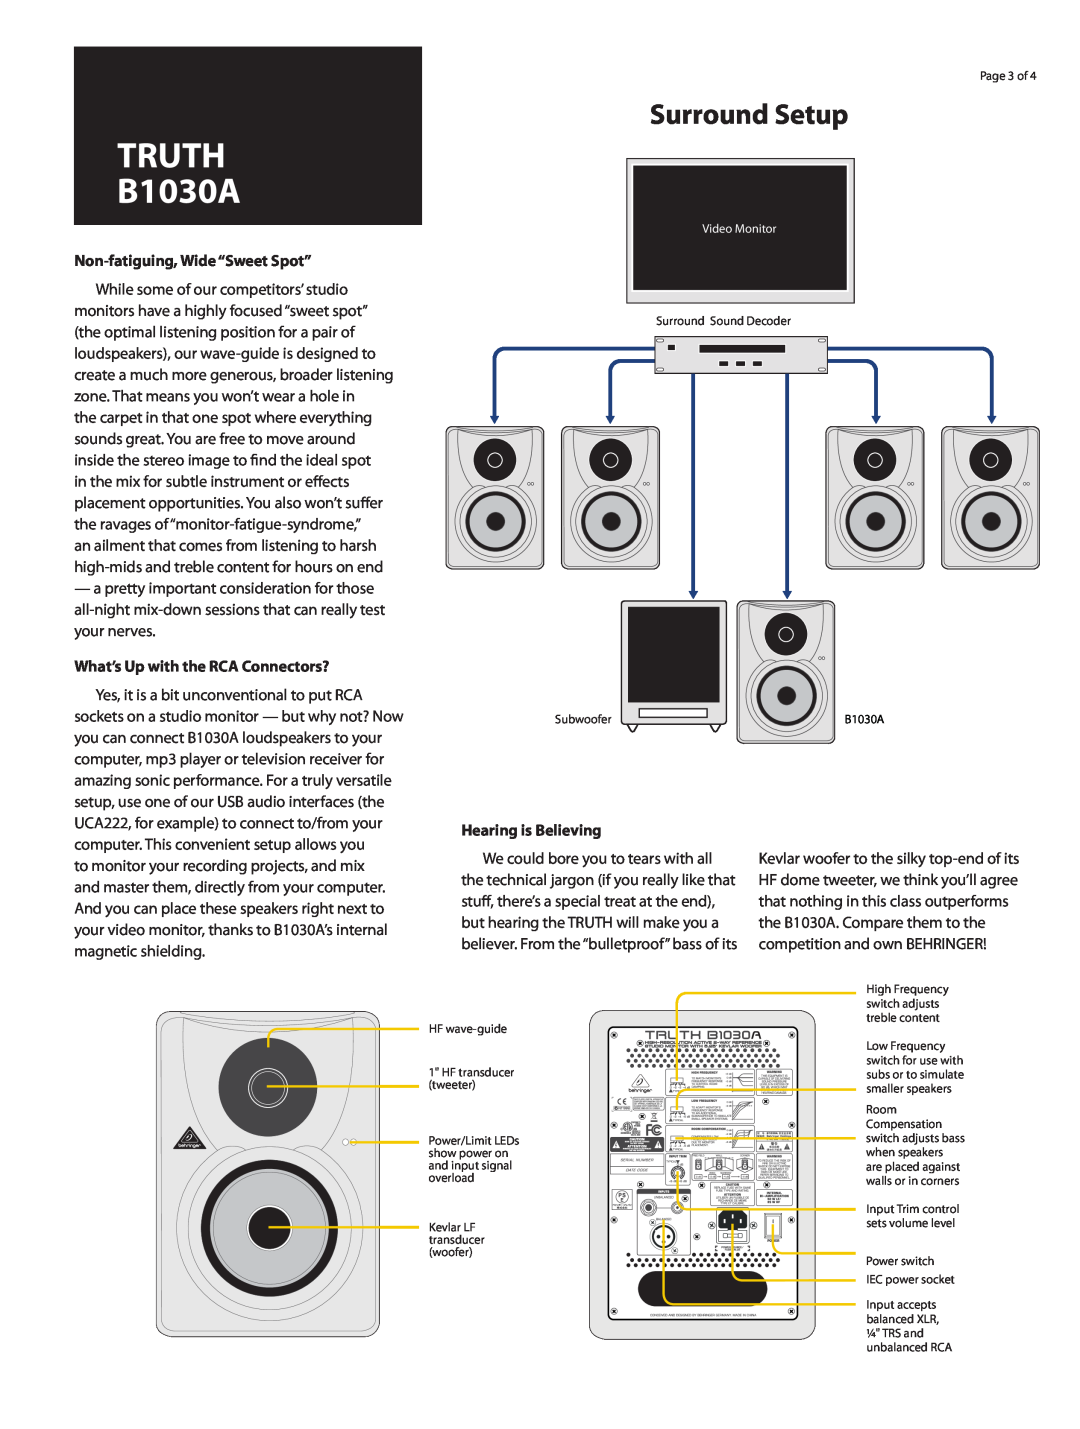 Behringer B1030A Surround Setup, Non-fatiguing,Wide “Sweet Spot”, What’s Up with the RCA Connectors?, Hearing is Believing 